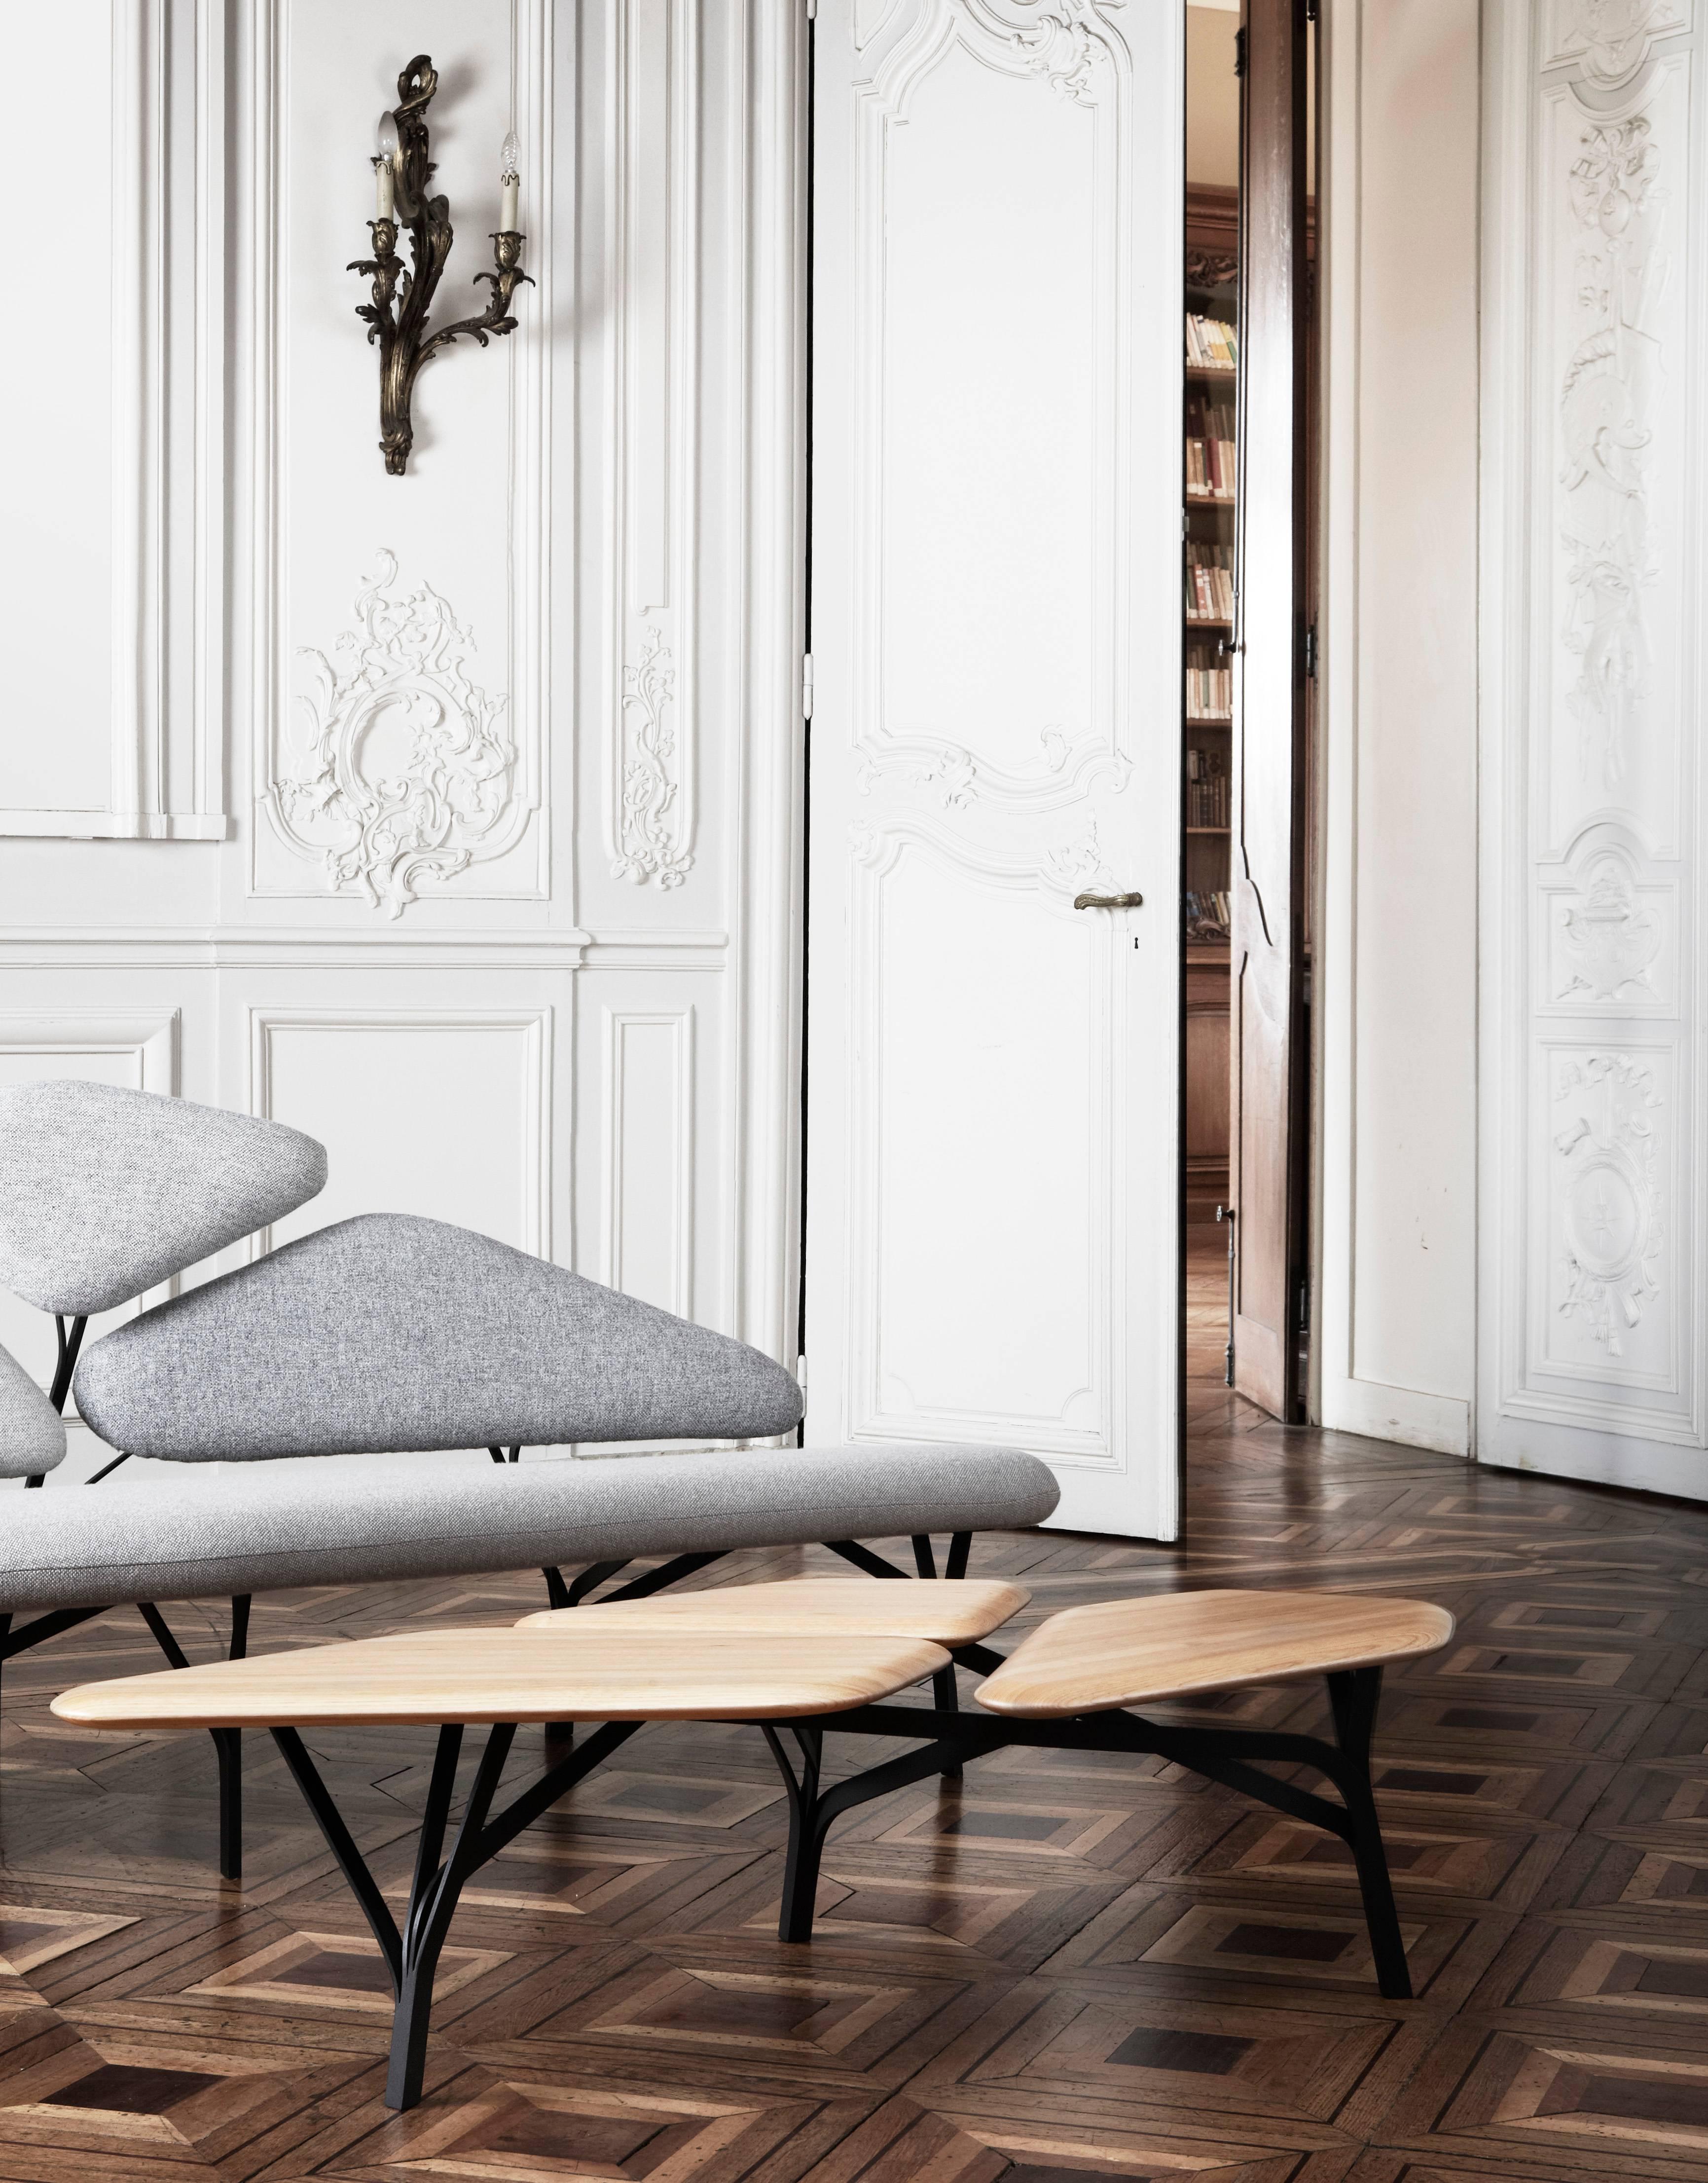 Borghese coffee table by Noé Duchaufour-Lawrance

Dimensions: 35 x 139 x 64 cm
Solid oak tabletop, steel structure
Mat black stained wood

Noé Duchaufour Lawrance started his career as a sculptor and used all his gifts to create the Borghese